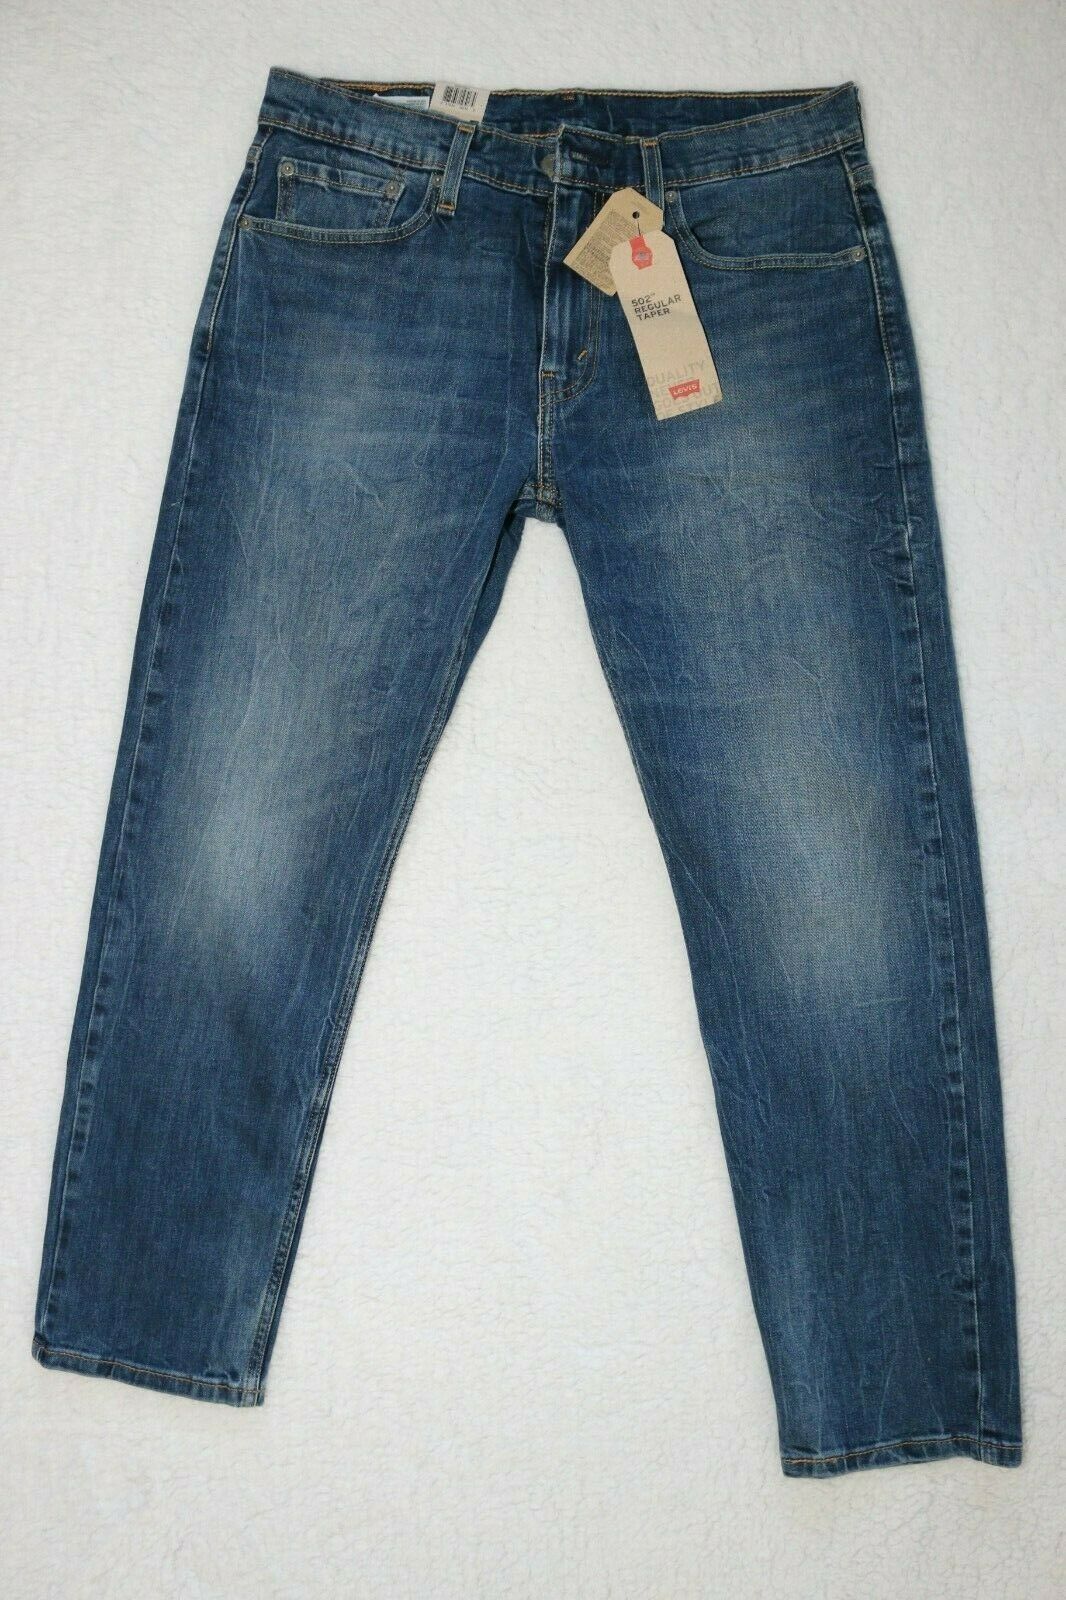 NWT Levi's 502 Regular Tapered Fit Stretch Jeans Blue stone, Rosefinch, Tanager